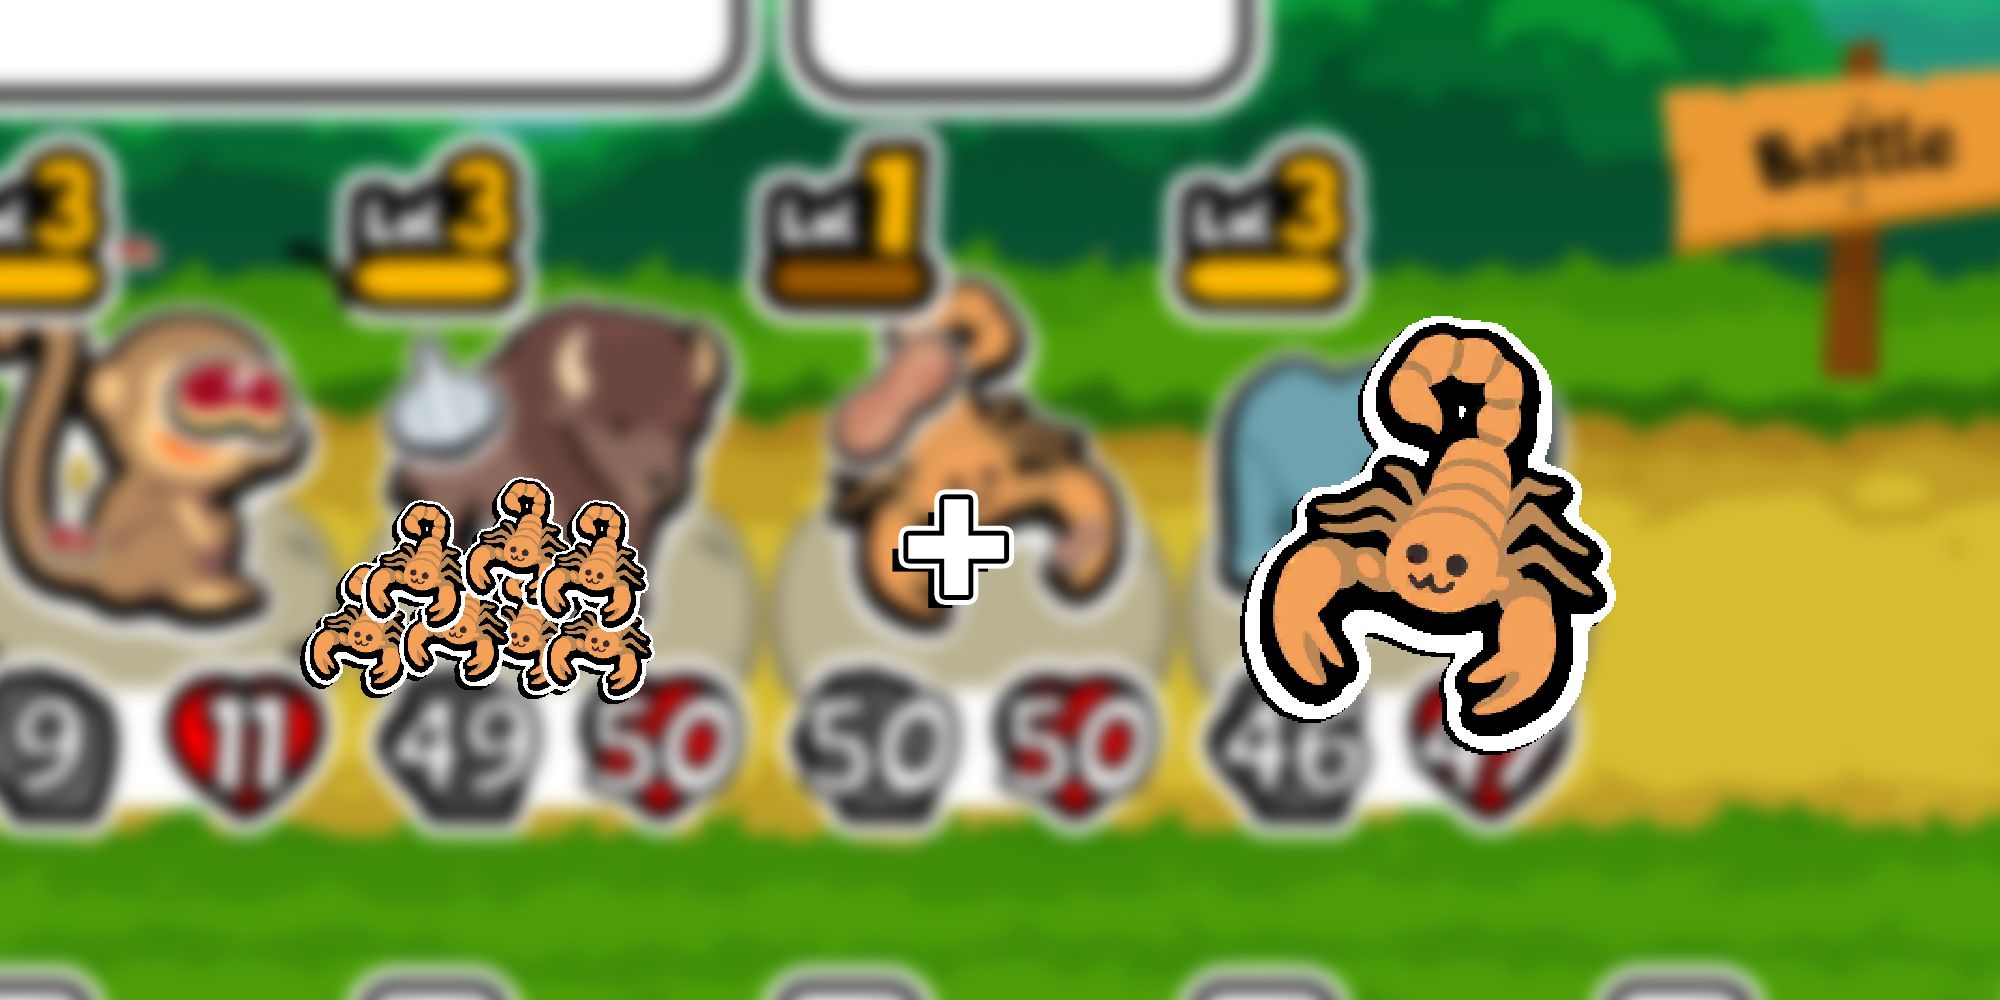 Super Auto Pets - PNG Of Scorpion And Oversized PNG Of Scorpion Pet Overlaid On Image Of A 50 HP 50 Pow Scorpion In-Game